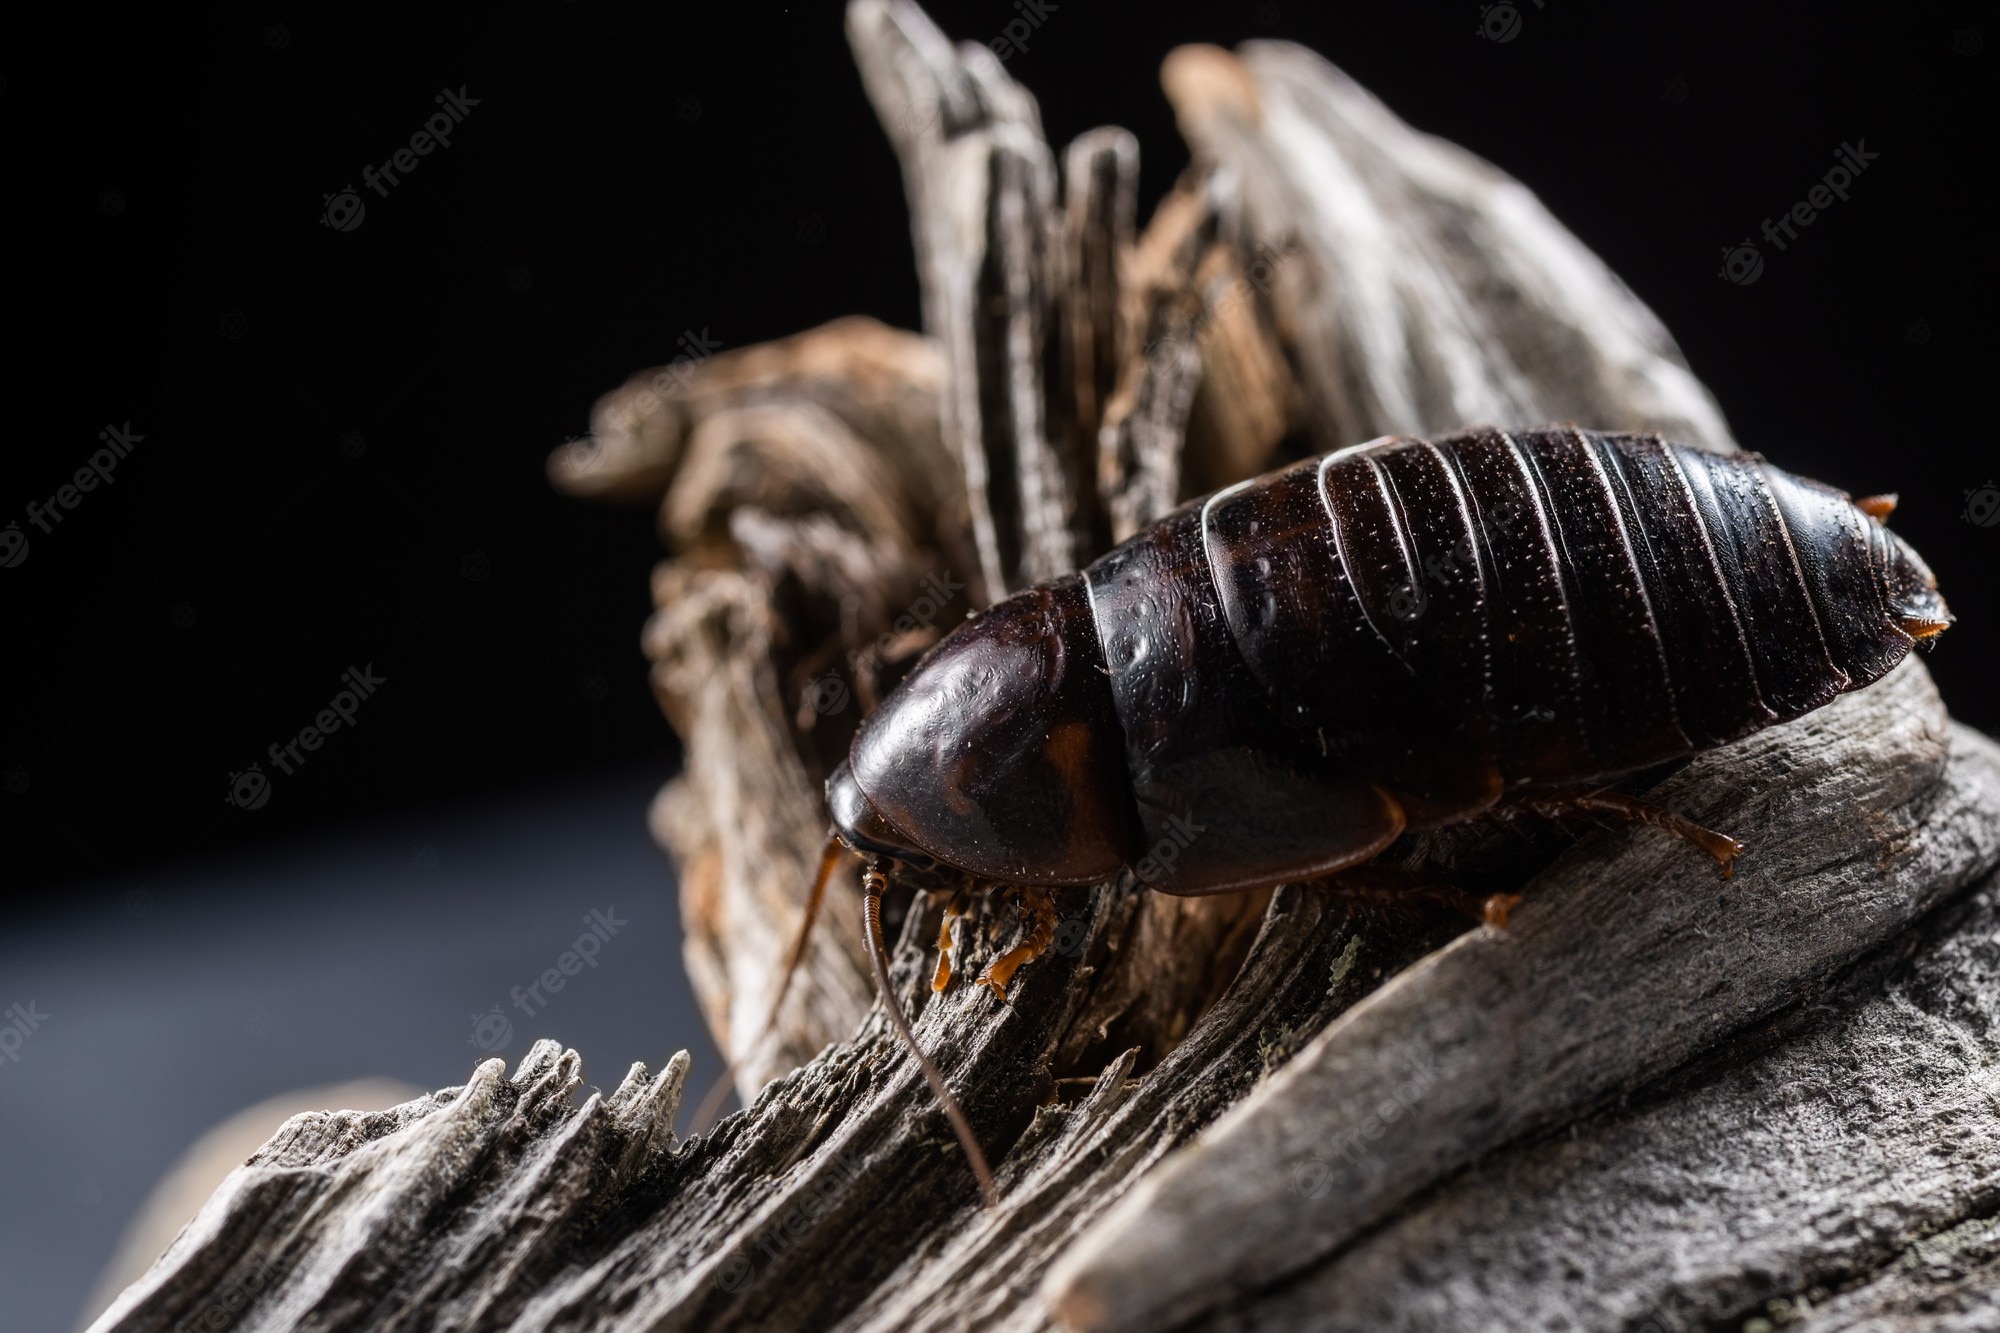 The Different Types of Cockroaches and How to Get Rid of Them